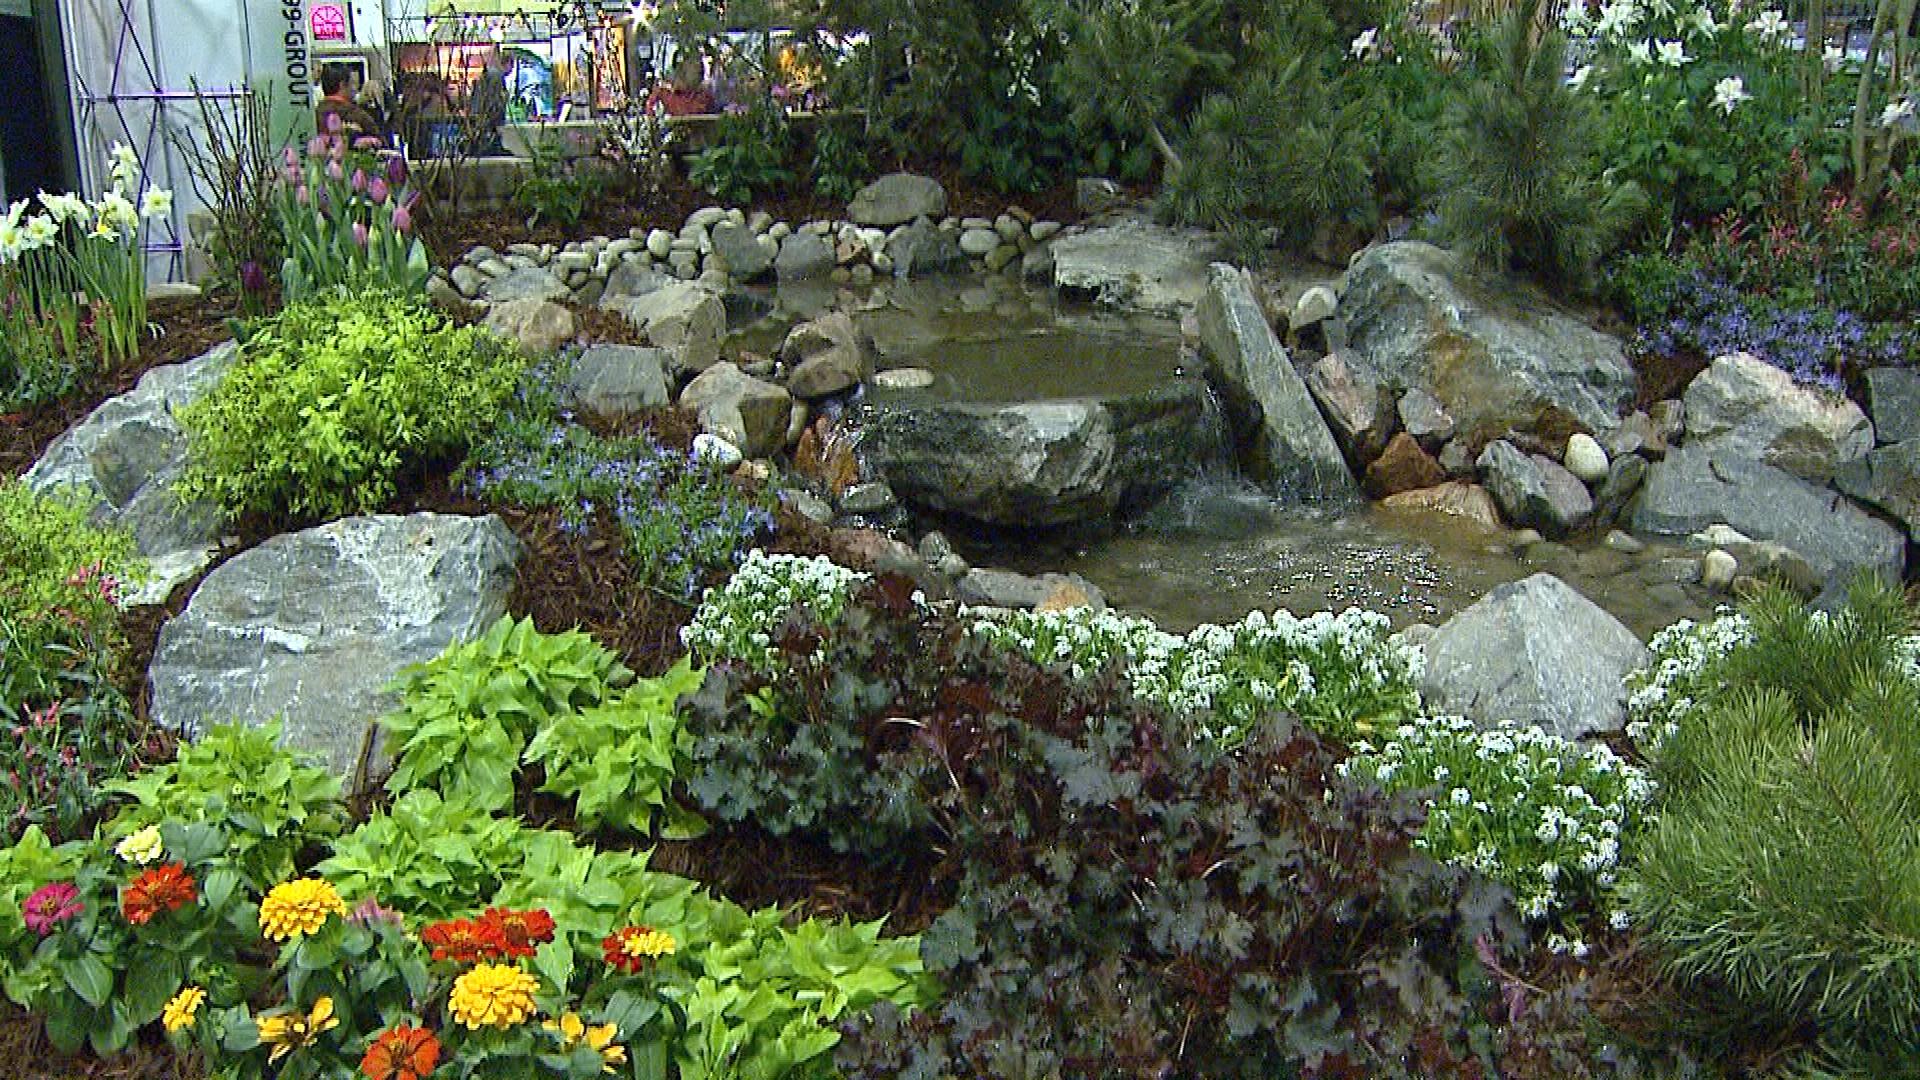 Colorado Garden Home Show Gets Big Boost From The Warm Weather